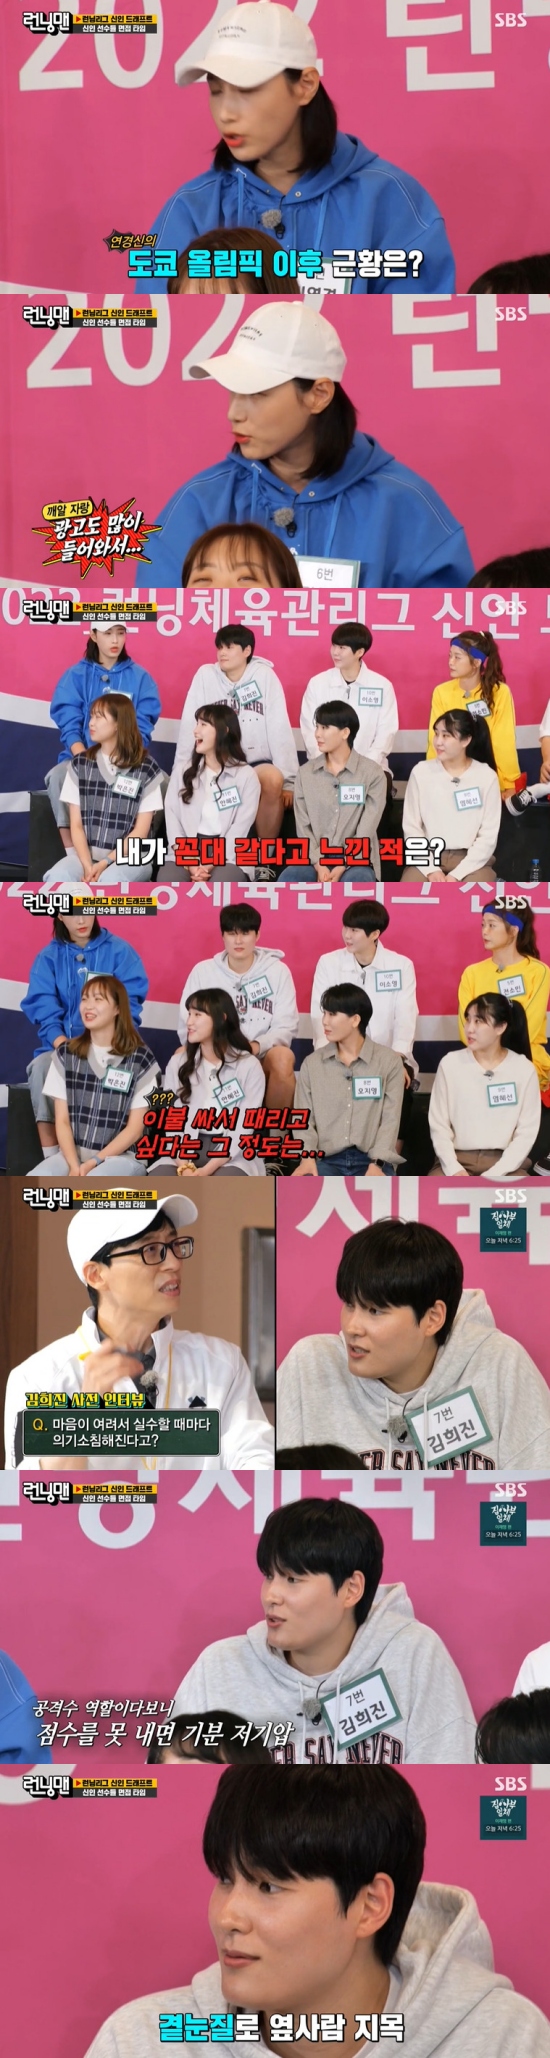 On SBS Running Man broadcasted on the 26th, Yoo Jae-Suk interviewed the national womens volleyball players while being decorated with Huk-Kwan and national team race.On this day, Yoo Jae-Suk and Kim Jong Kook attended the 2022 Running Sports Management New Draft as the director.At this time, seven national women volleyball players (Kim Yeon-koung, Kim Hee-jin, Yeum Hye-Seon, Oh Ji-young, Lee So-young, Ahn Hye-jin, and Park Eun-jin) appeared as big new players.Yoo Jae-Suk had time to interview the players.Yoo Jae-Suk first asked Kim Yeon-koung, How is Kim Yeon-koung doing after the Olympic Games?Kim Yeon-koung tipped off, saying, Im doing well - Ive got a lot of ads these days.Yoo Jae-suk asked, I have been in charge for a long time, but I am asking myself, I want to be like you. Kim Yeon-koung asked his junior players, Is there a time like you?Yoo Jae-Suk quipped, saying, This is the big deal.Yoo Jae-Suk asked other players if Kim Yeon-koung felt like a band, and Ahn Hye-jin said, There was no such thing, but once I wanted to wrap the blanket on the last day.Yoo Jae-Suk asked Kim Hee-jin, I am depressed every time I make a mistake because I have a heart. Kim Hee-jin said, I want to do too well and I have to point.Yoo Jae-Suk said, Is it you yourself?Whose eyes are you seeing? Kim Hee-jin laughed at Kim Yeon-koung with his side eyes.Yoo Jae-Suk told Yeum Hye-Seon: Its a third generation volleyball family, Grandmas Boy and both parents played volleyball.I was wondering, Yeum Hye-Seon said, Grandmas Boy was called every time I was in freshman (match).What are you doing? Is that a match? He said. Im not annoyed with Grandmas Boy. What are you doing now?Yoo Jae-Suk is a good friend of Oh Ji-young, so he was glad that Oh Ji-young has recently met me in another professional but I am more sophisticated than that.But Haha said, Is it a rustic time? And Oh Ji-young said, At that time, I wore a uniform.Yoo Jae-Suk said, I did not put the word in my mouth that it was rustic. It was a story that I was sophisticated over and over.Even if our team loses, Oh Ji-young is once checked, he said, and Oh Ji-young expressed confidence that he will make me need it.Ahn Hye-jin and Lee So-young confessed that they were Running Man listeners, and Lee So-young expressed affection, saying, Its my favorite program. I watch it every week.Not only that, Yoo Jae-Suk mentioned the fact that Ahn Hye-jins nickname was volleyball Shin Min-a, and other players wondered as if it were a shortcut.Ahn Hye-jin claimed to resemble Shin Min-a himself, and Yoo Jae-Suk helped, saying, Ill give you a score for the kangdagu.Yoo Jae-Suk said, I asked the club owner to call me Yuyomi.I do not ask for this, and Ahn Hye-jin said, (I) look a little cute.Finally, Yoo Jae-Suk admired that Park Eun-jin is said to be a positive king on the court, and Kim Yeon-koung said, Fighting is so good.Photo = SBS broadcast screen